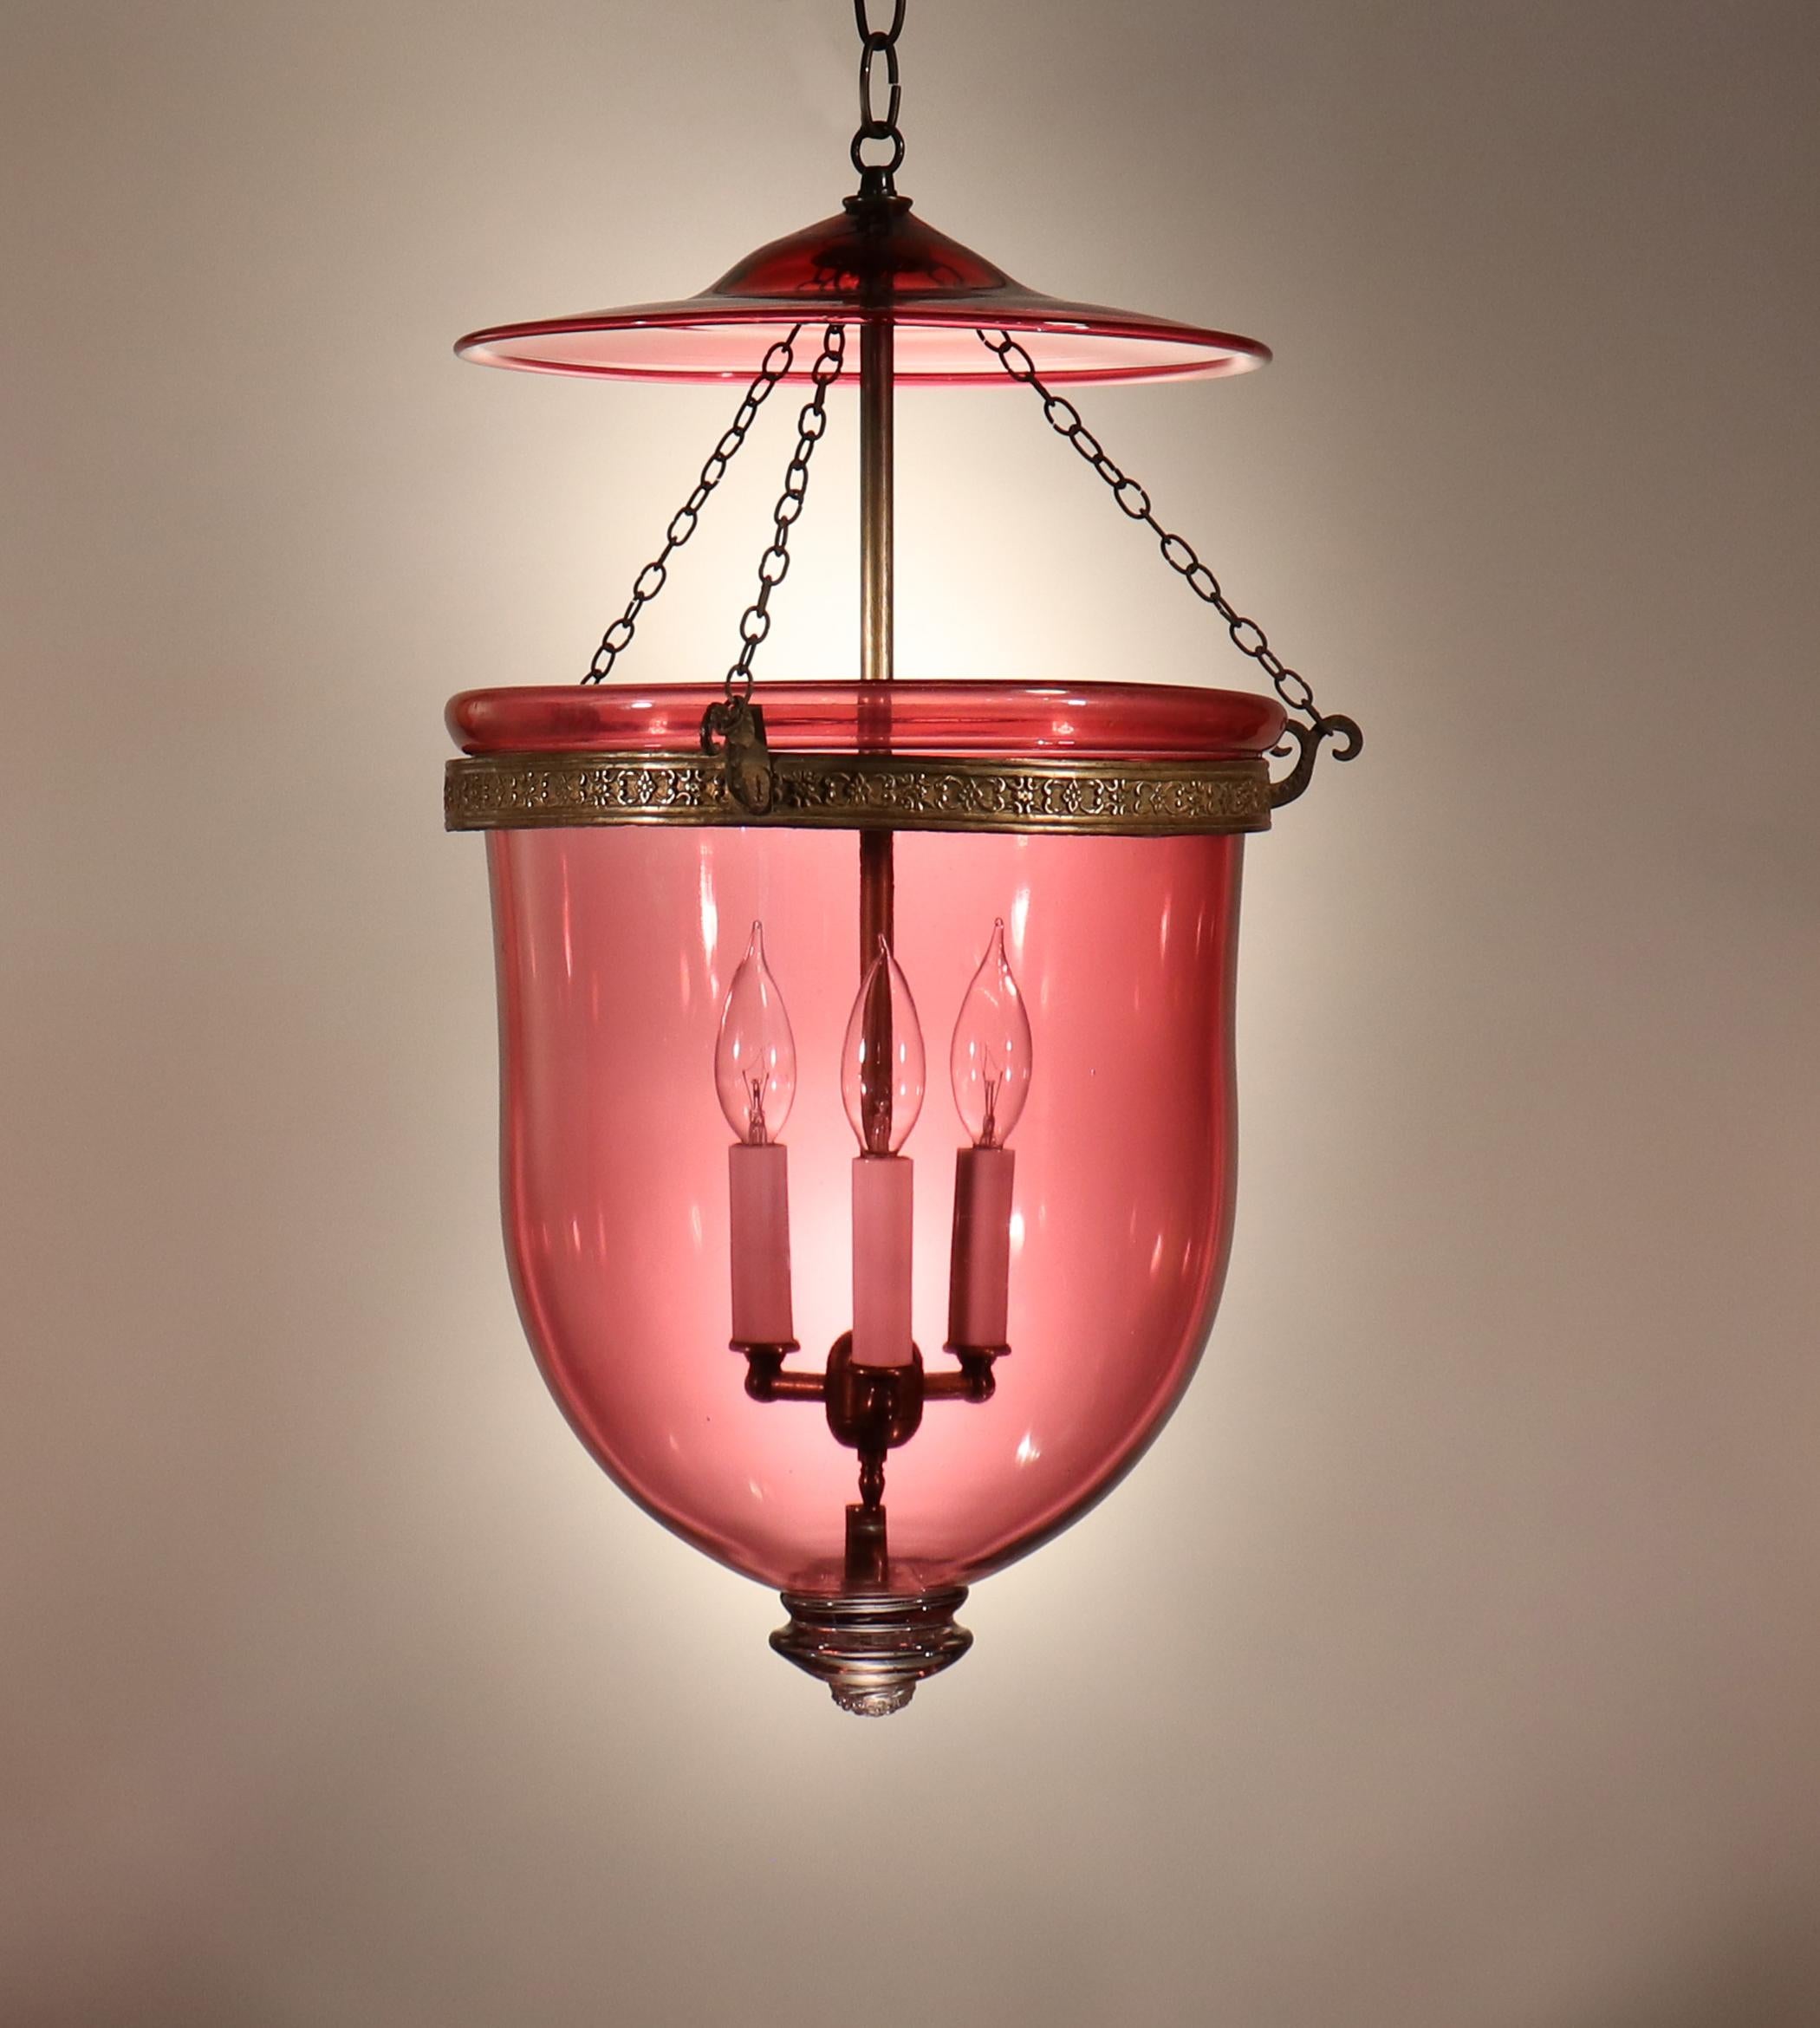 An exquisite cranberry glass bell jar lantern with its original embossed brass band, smoke bell/lid, and chains. This circa 1870 English lantern is generously sized, possesses lovely form, and has several desirable air bubbles in the hand blown